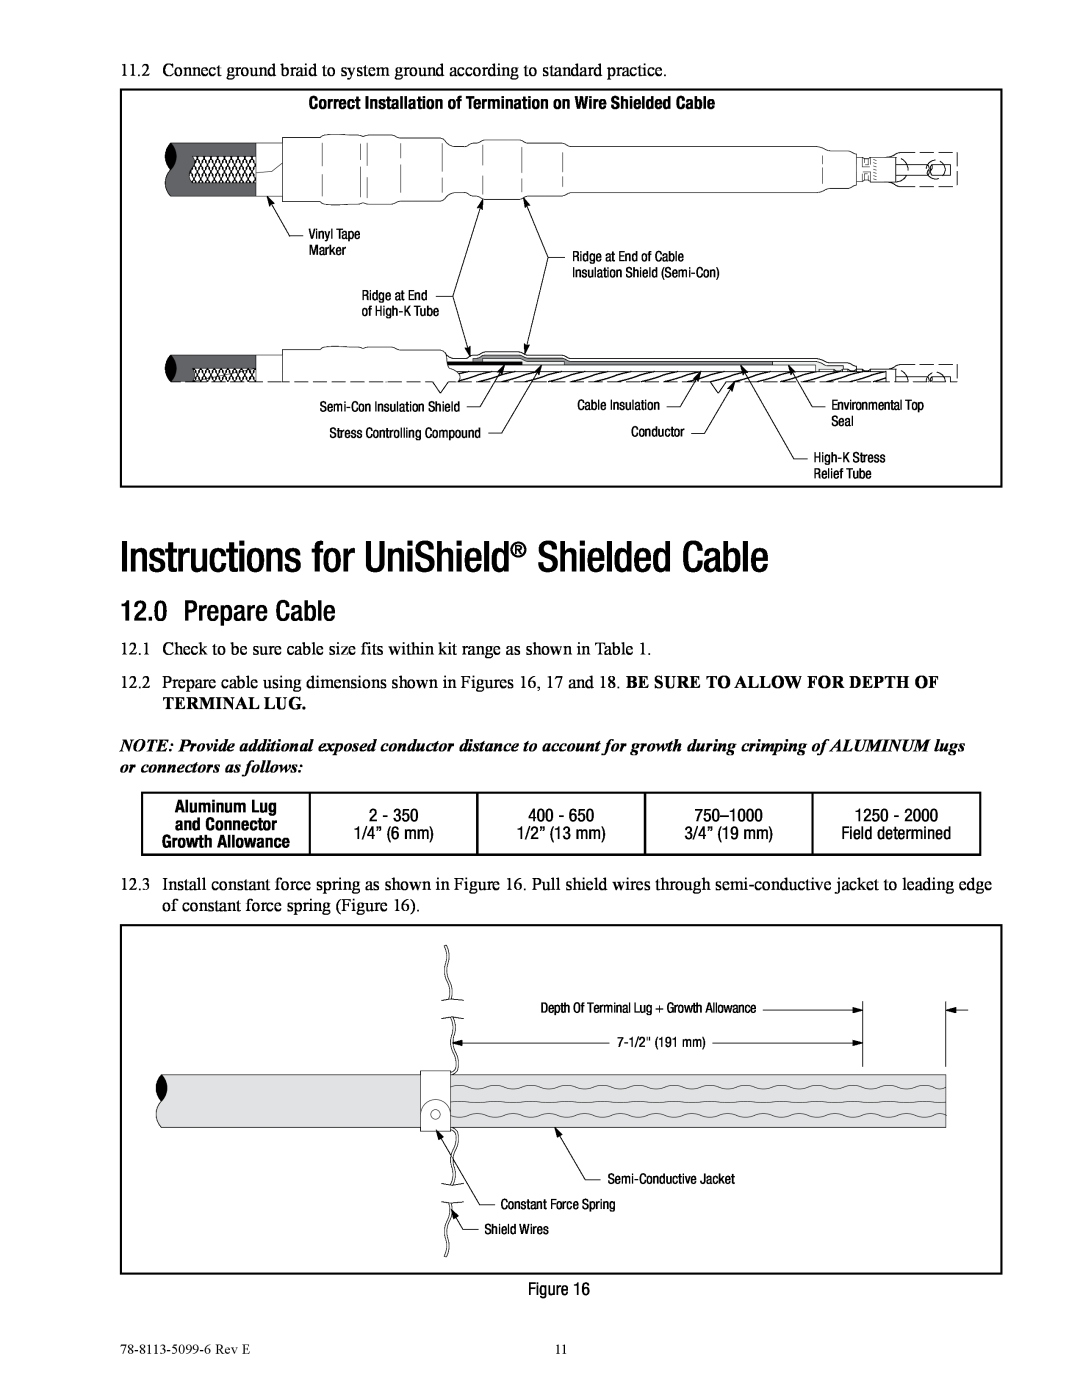 3M 7622-T-110, 7626-T-110, 7624-T-110, 7623-T-110, 7625-T-110 Instructions for UniShield Shielded Cable, 12.0Prepare Cable 